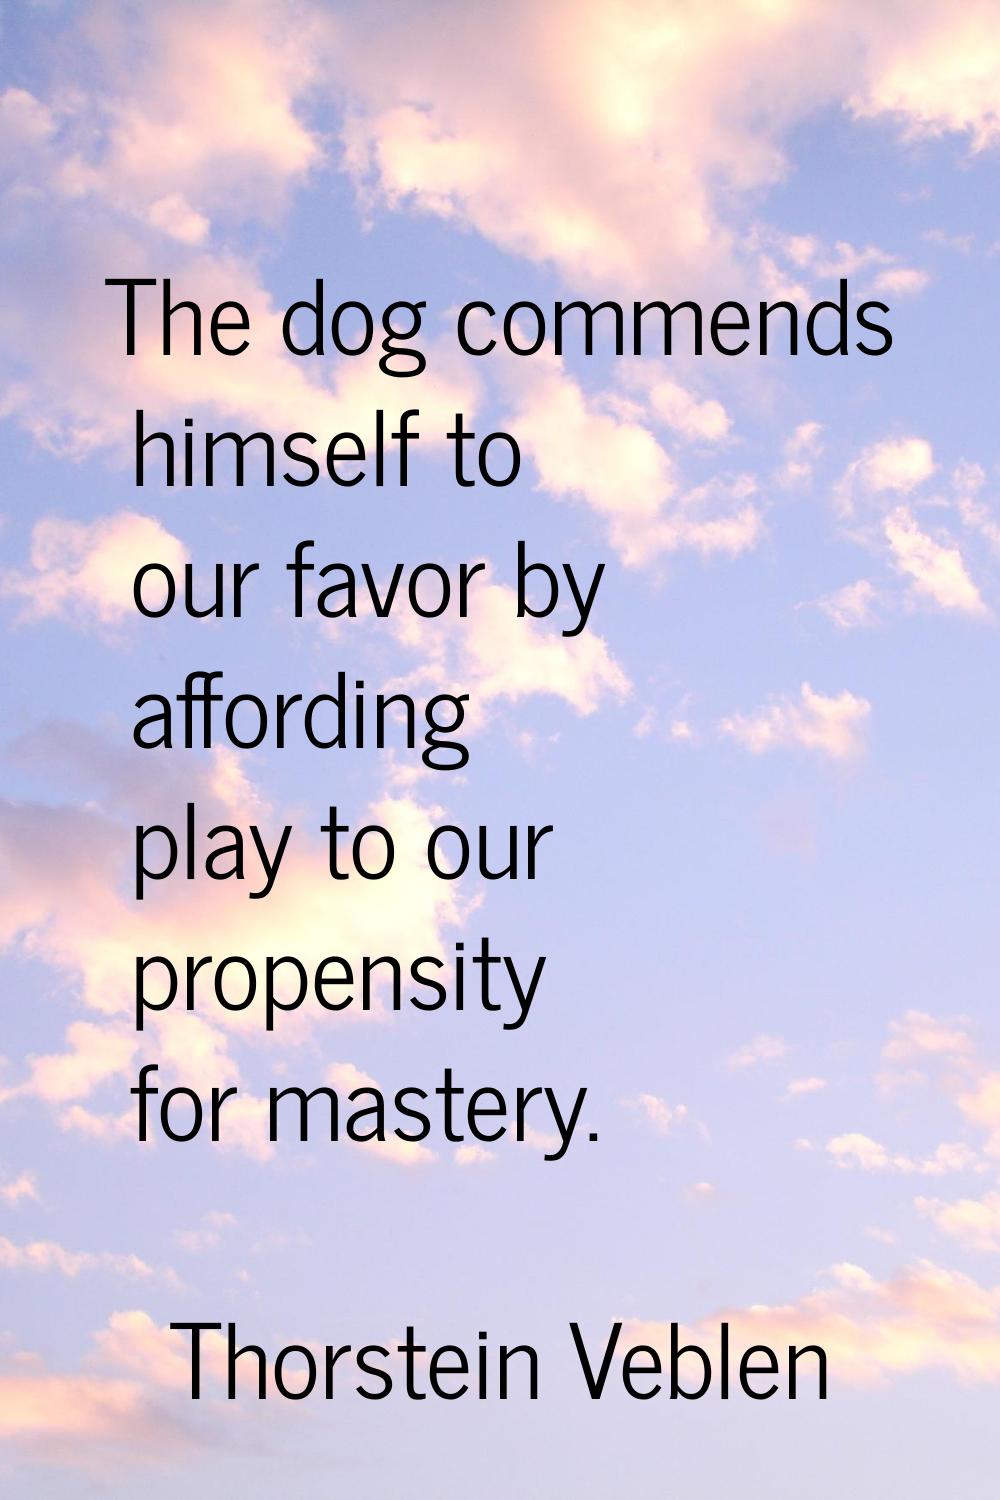 The dog commends himself to our favor by affording play to our propensity for mastery.